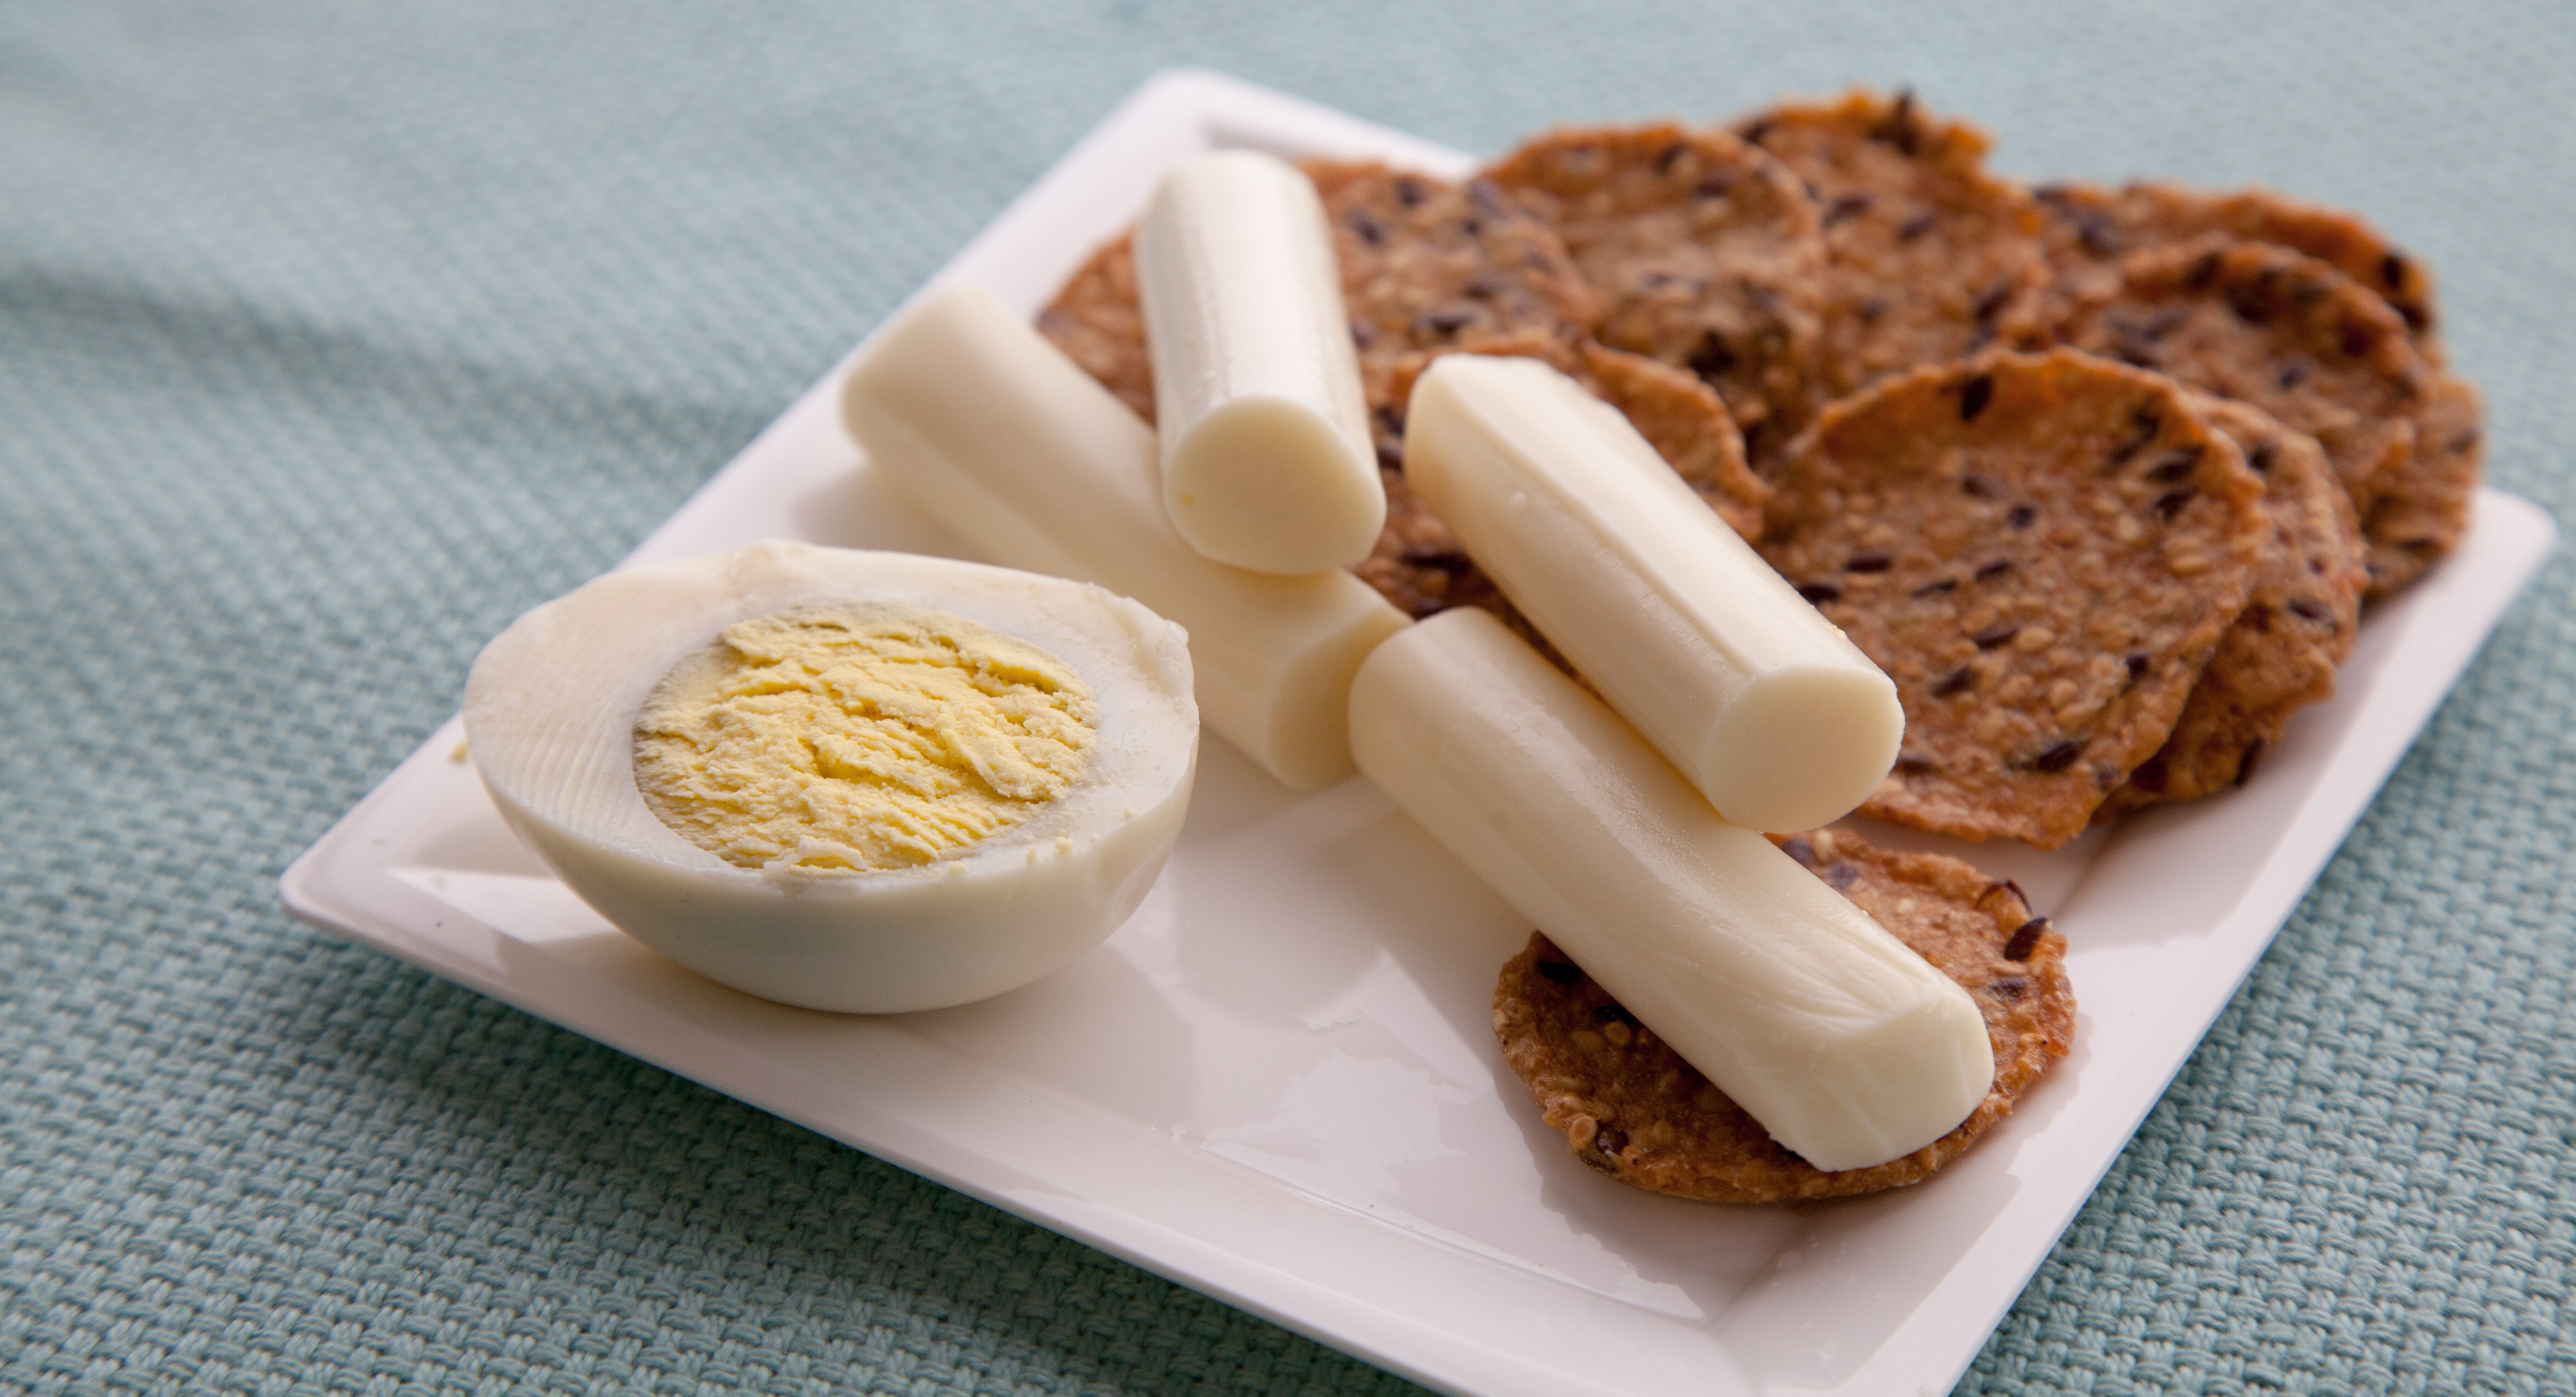 Cheese, Crackers & Boiled Egg